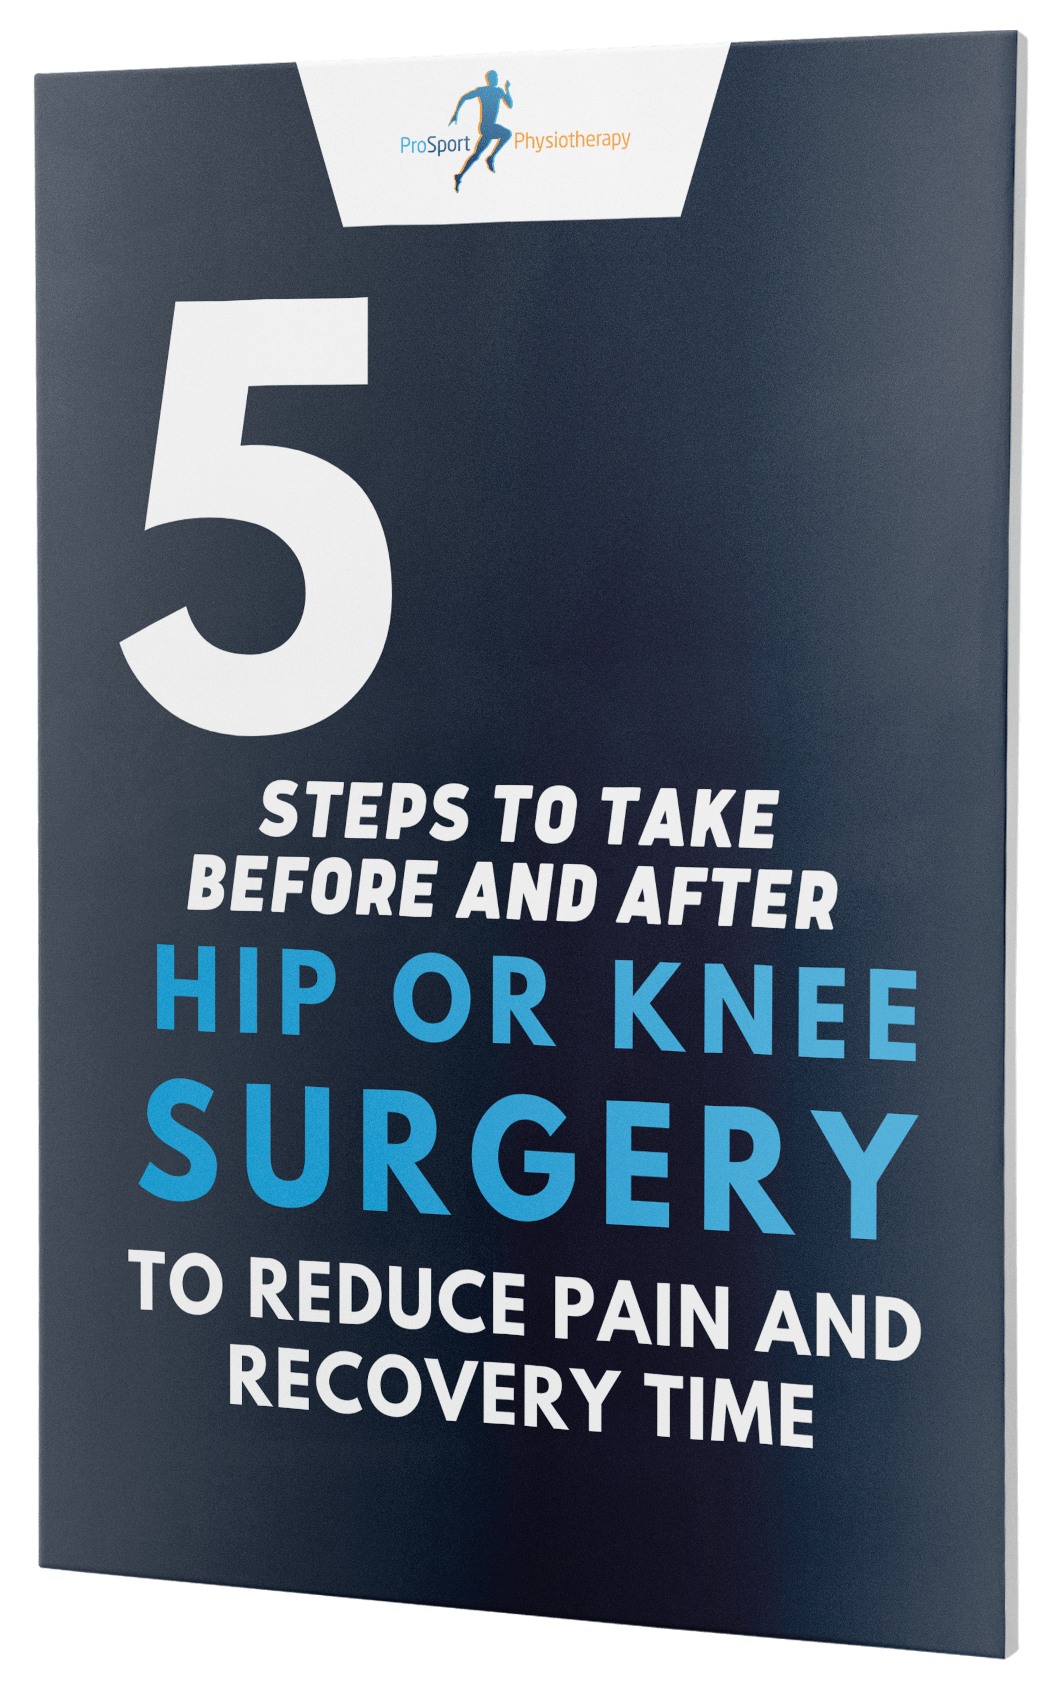 PDF Guide 5 steps to recovery after surgery Pro Sport Physiotherapy Huddersfield